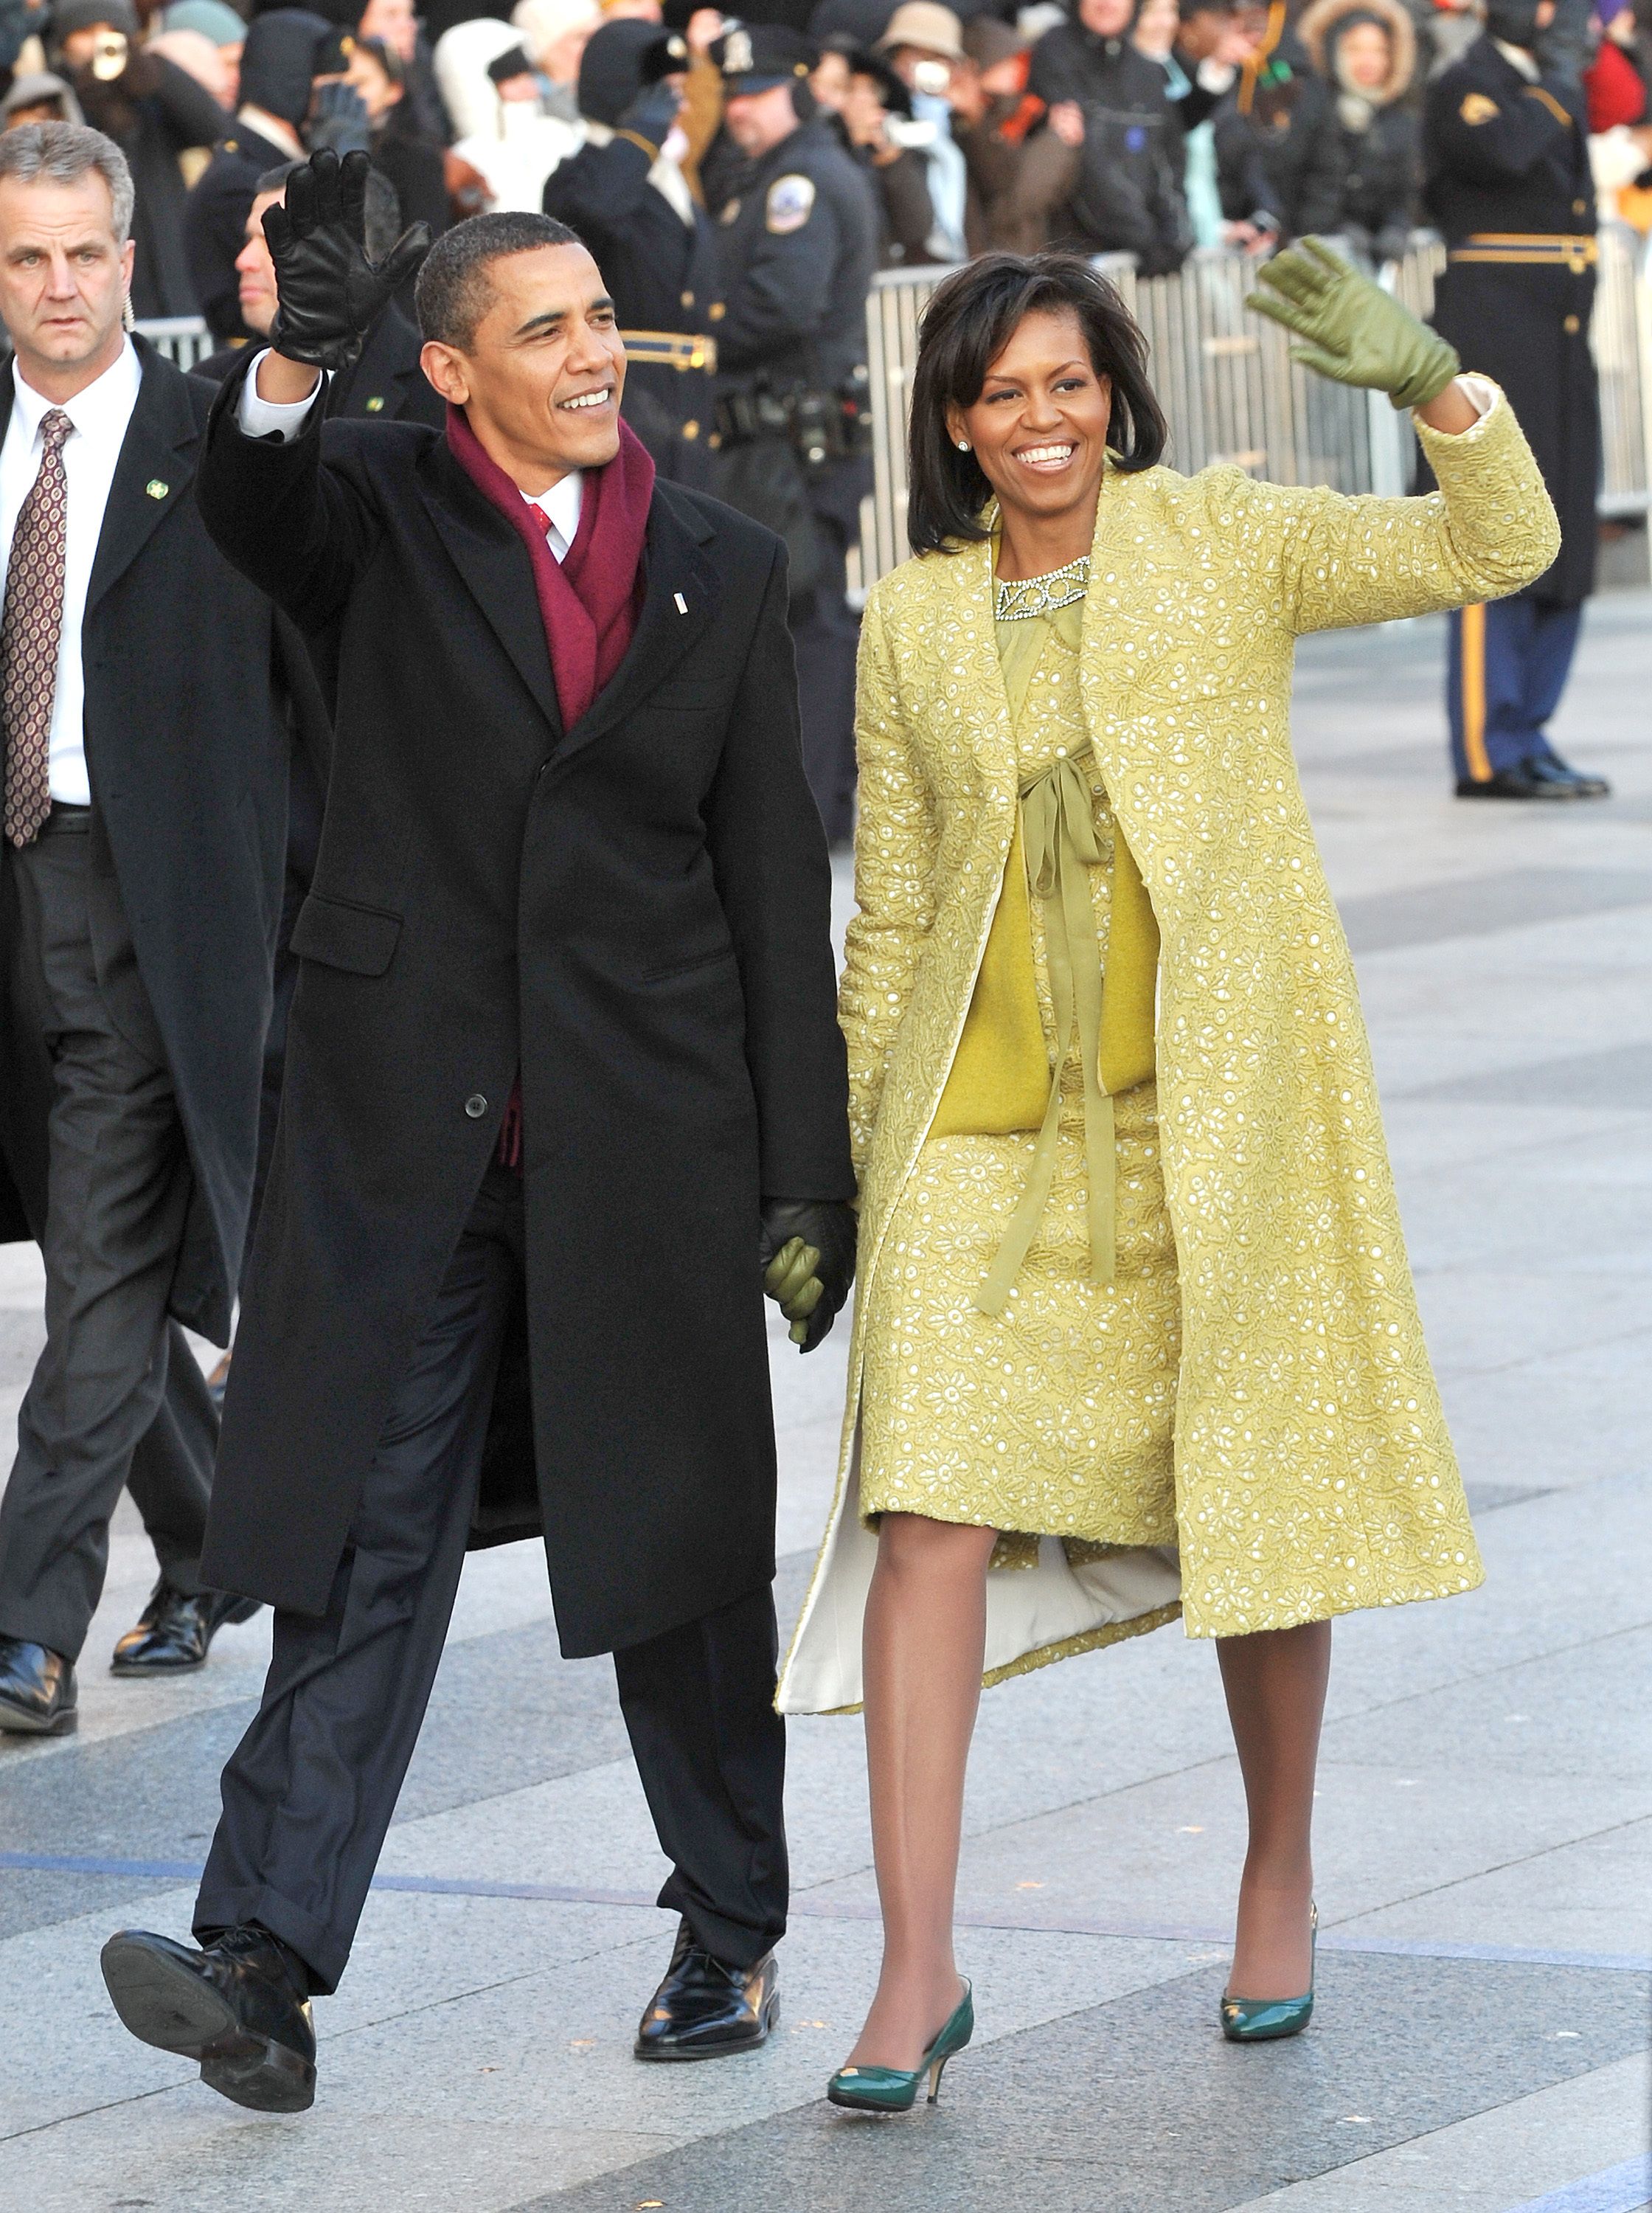 President Barack Obama and first lady Michelle Obama walk in the Inaugural Parade on January 20, 2009, in Washington, DC. | Photo: Ron Sachs-Pool/Getty Images